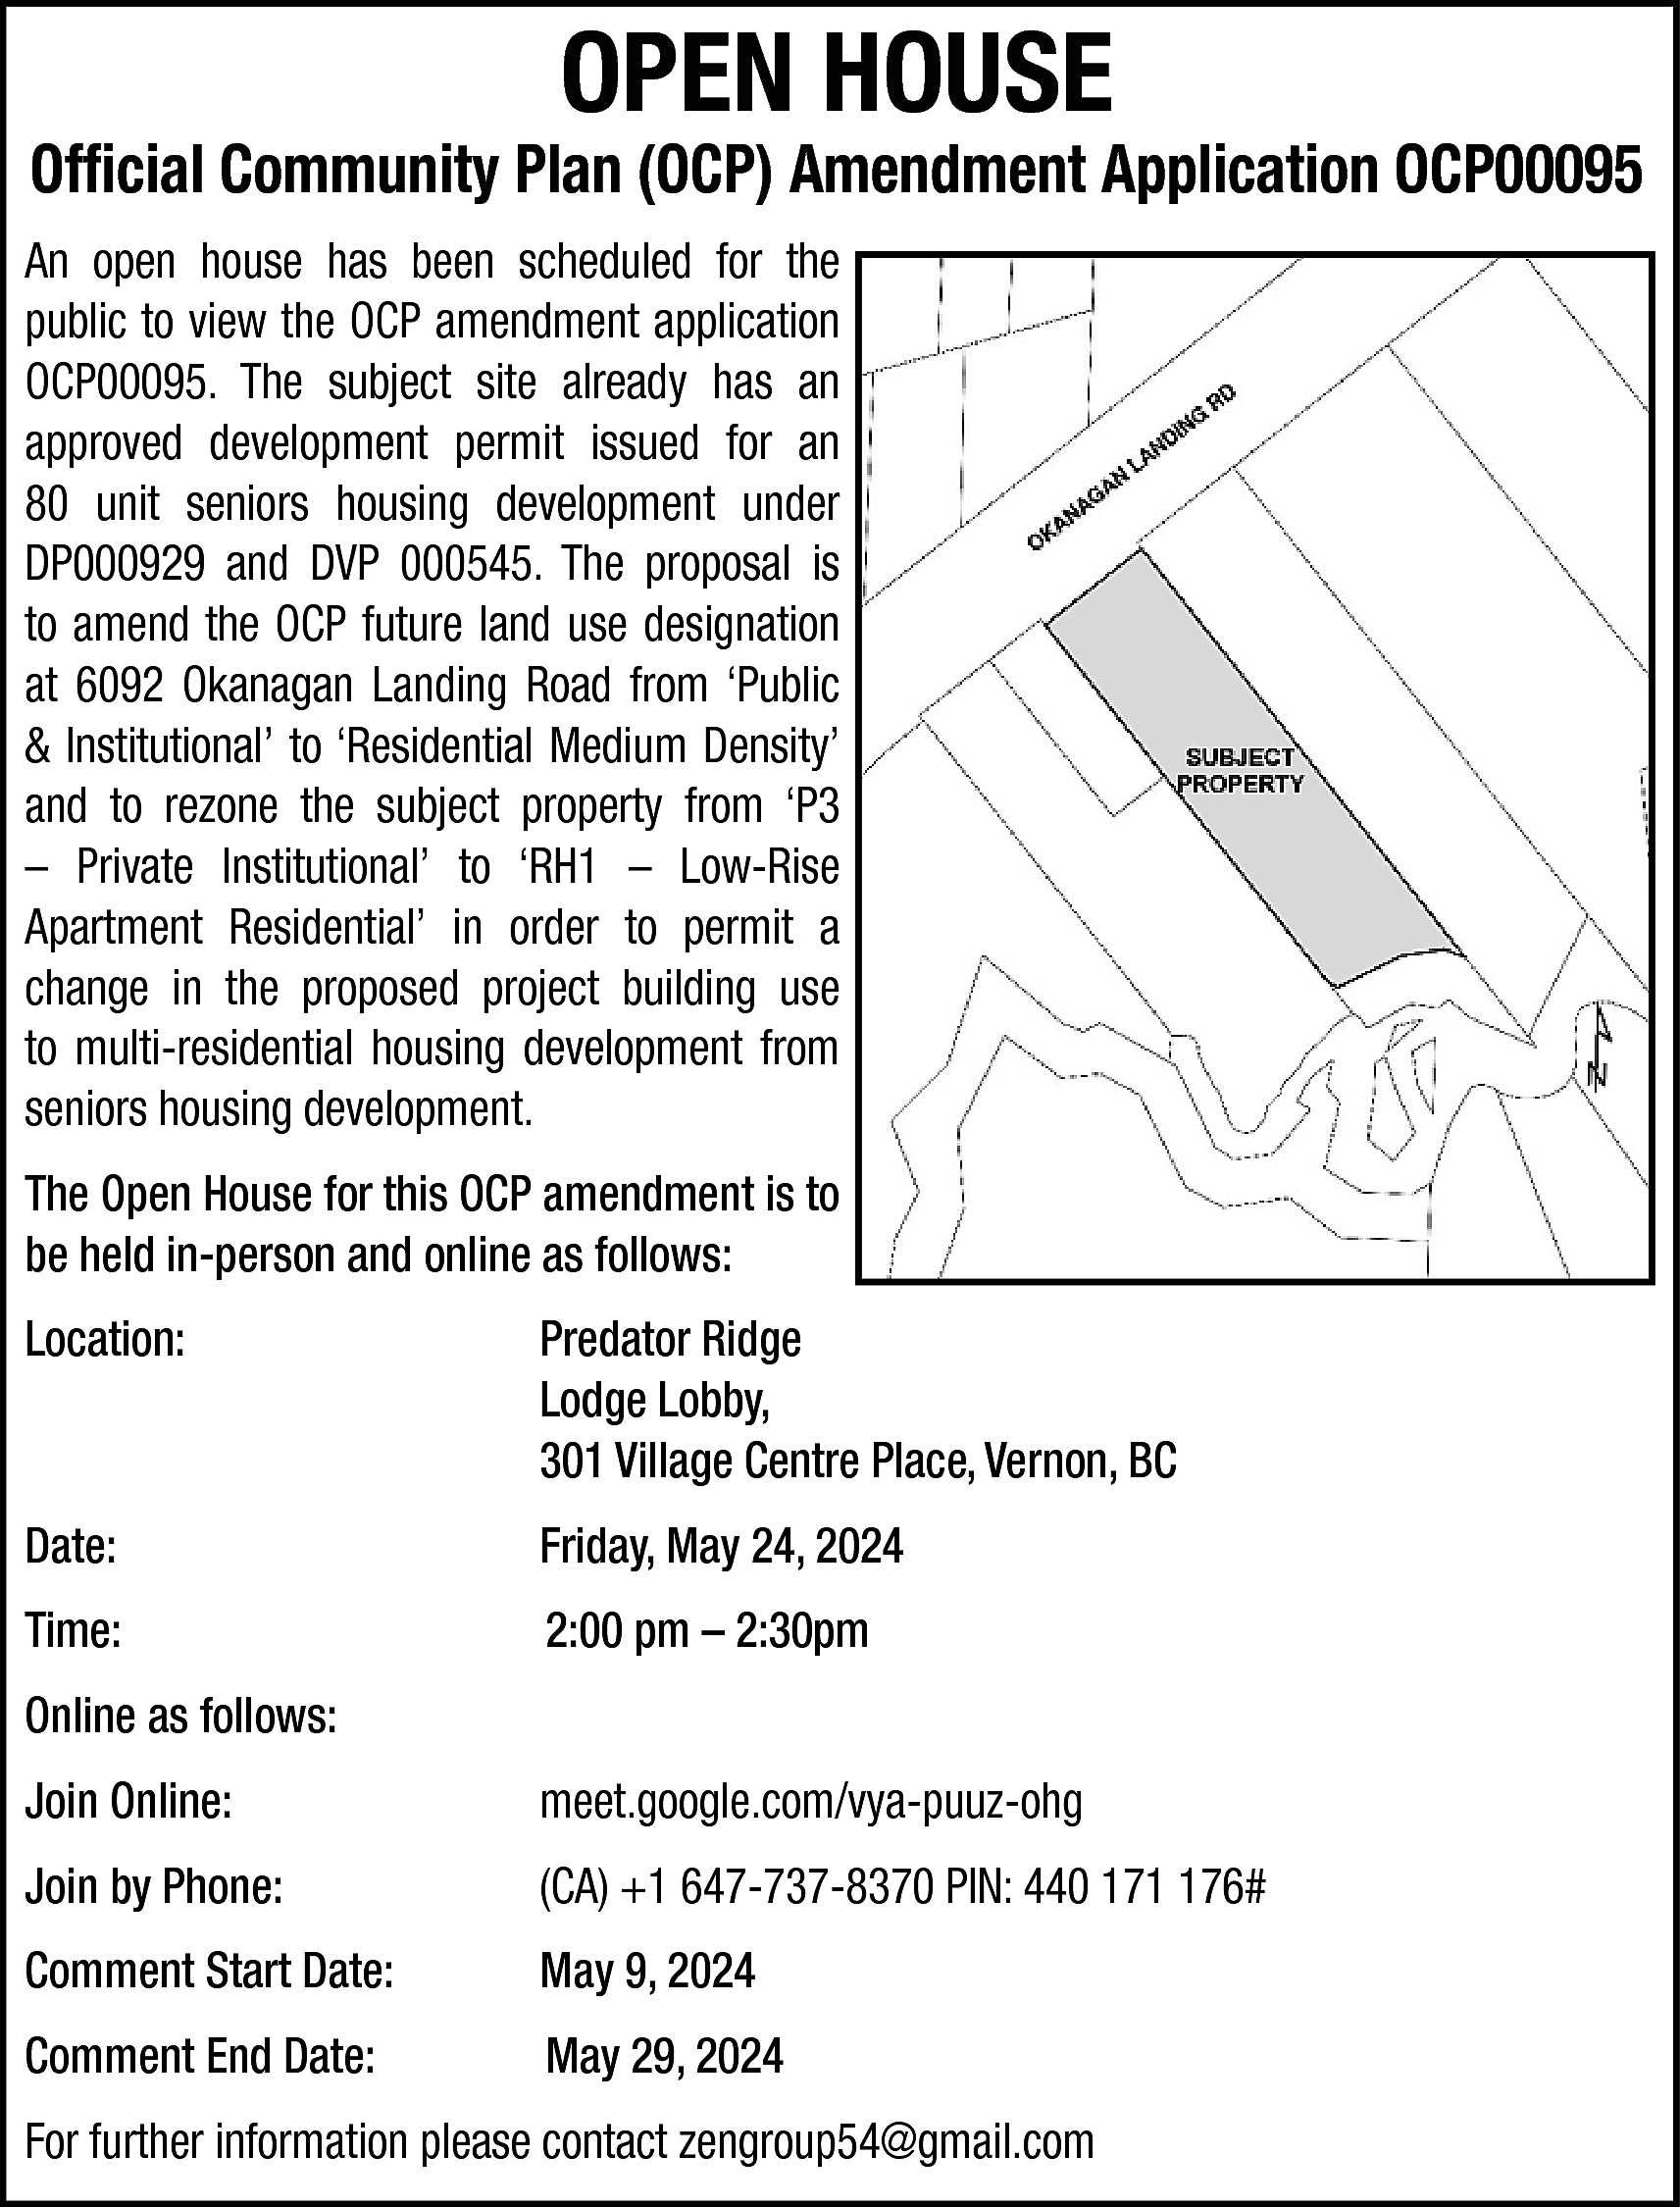 OPEN HOUSE <br> <br>Official Community  OPEN HOUSE    Official Community Plan (OCP) Amendment Application OCP00095  An open house has been scheduled for the  public to view the OCP amendment application  OCP00095. The subject site already has an  approved development permit issued for an  80 unit seniors housing development under  DP000929 and DVP 000545. The proposal is  to amend the OCP future land use designation  at 6092 Okanagan Landing Road from ‘Public  & Institutional’ to ‘Residential Medium Density’  and to rezone the subject property from ‘P3  – Private Institutional’ to ‘RH1 – Low-Rise  Apartment Residential’ in order to permit a  change in the proposed project building use  to multi-residential housing development from  seniors housing development.  The Open House for this OCP amendment is to  be held in-person and online as follows:  Location:    Predator Ridge  Lodge Lobby,  301 Village Centre Place, Vernon, BC    Date:    Friday, May 24, 2024    Time:    2:00 pm – 2:30pm    Online as follows:  Join Online:    meet.google.com/vya-puuz-ohg    Join by Phone:    (CA) +1 647-737-8370 PIN: 440 171 176#    Comment Start Date:    May 9, 2024    Comment End Date:    May 29, 2024    For further information please contact zengroup54@gmail.com    